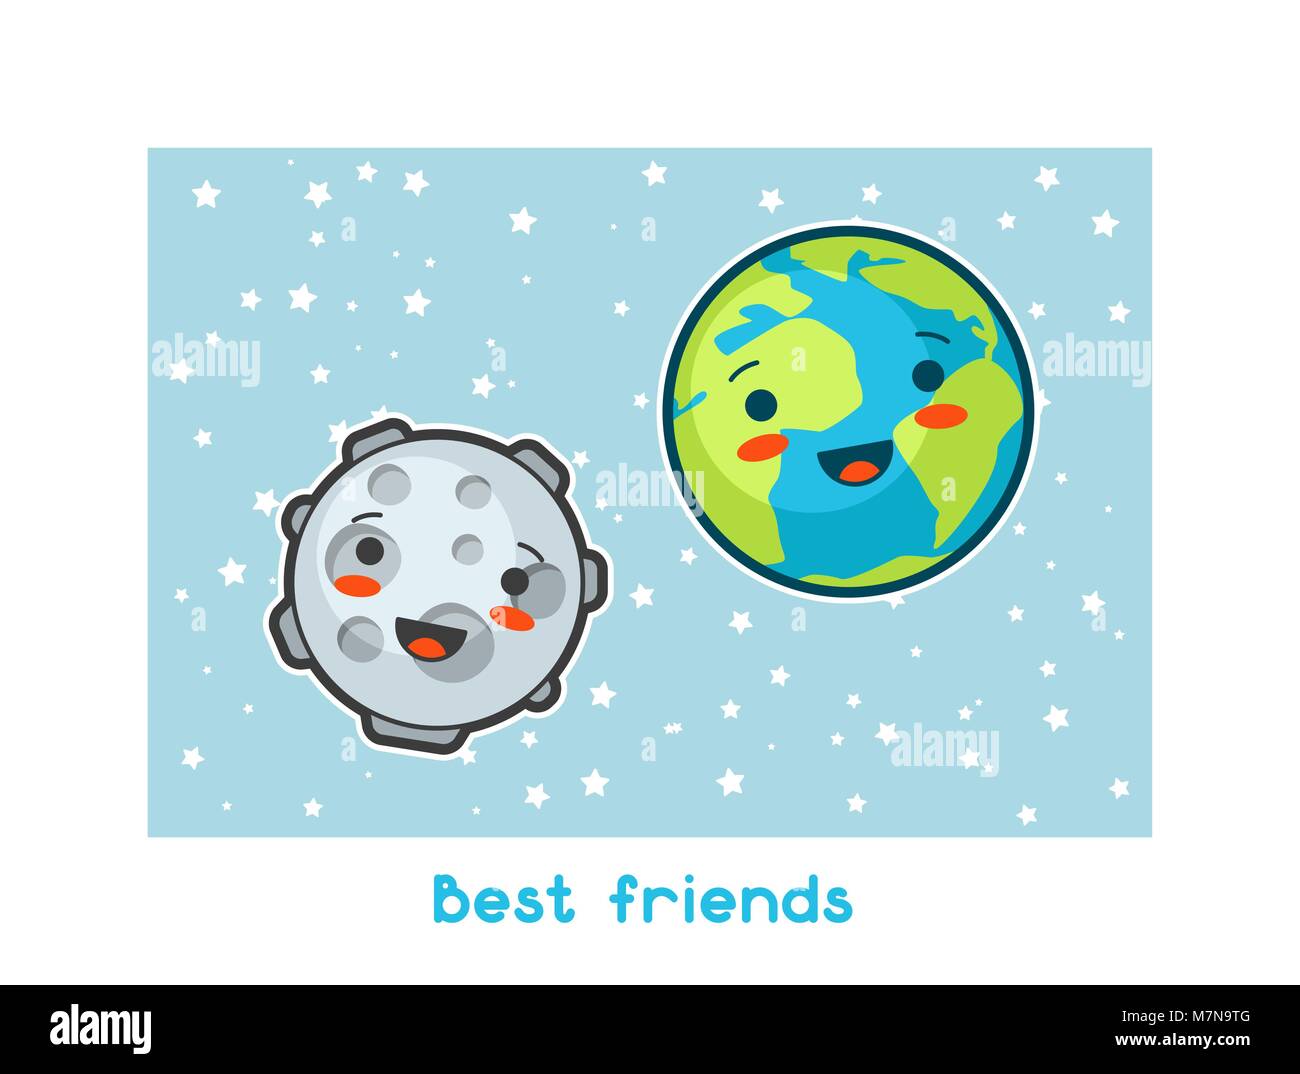 Best friends. Kawaii space funny card. Doodles with pretty facial expression. Illustration of cartoon earth and moon Stock Vector